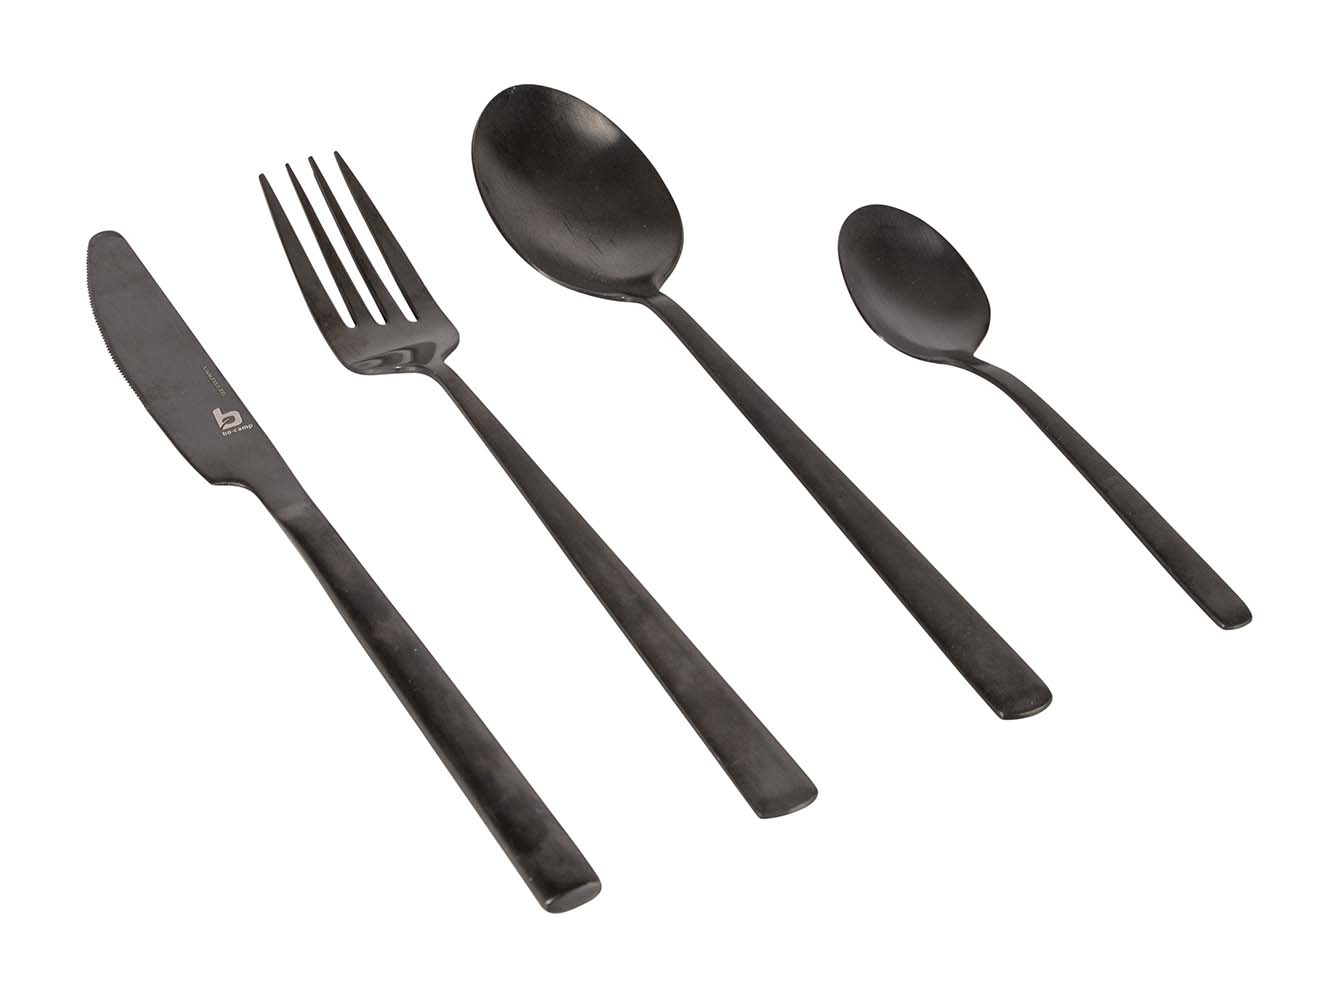 6102154 Bo-Camp - Industrial collection - Cutlery set - Ballona - 16 Pieces - 4 Persons - Black